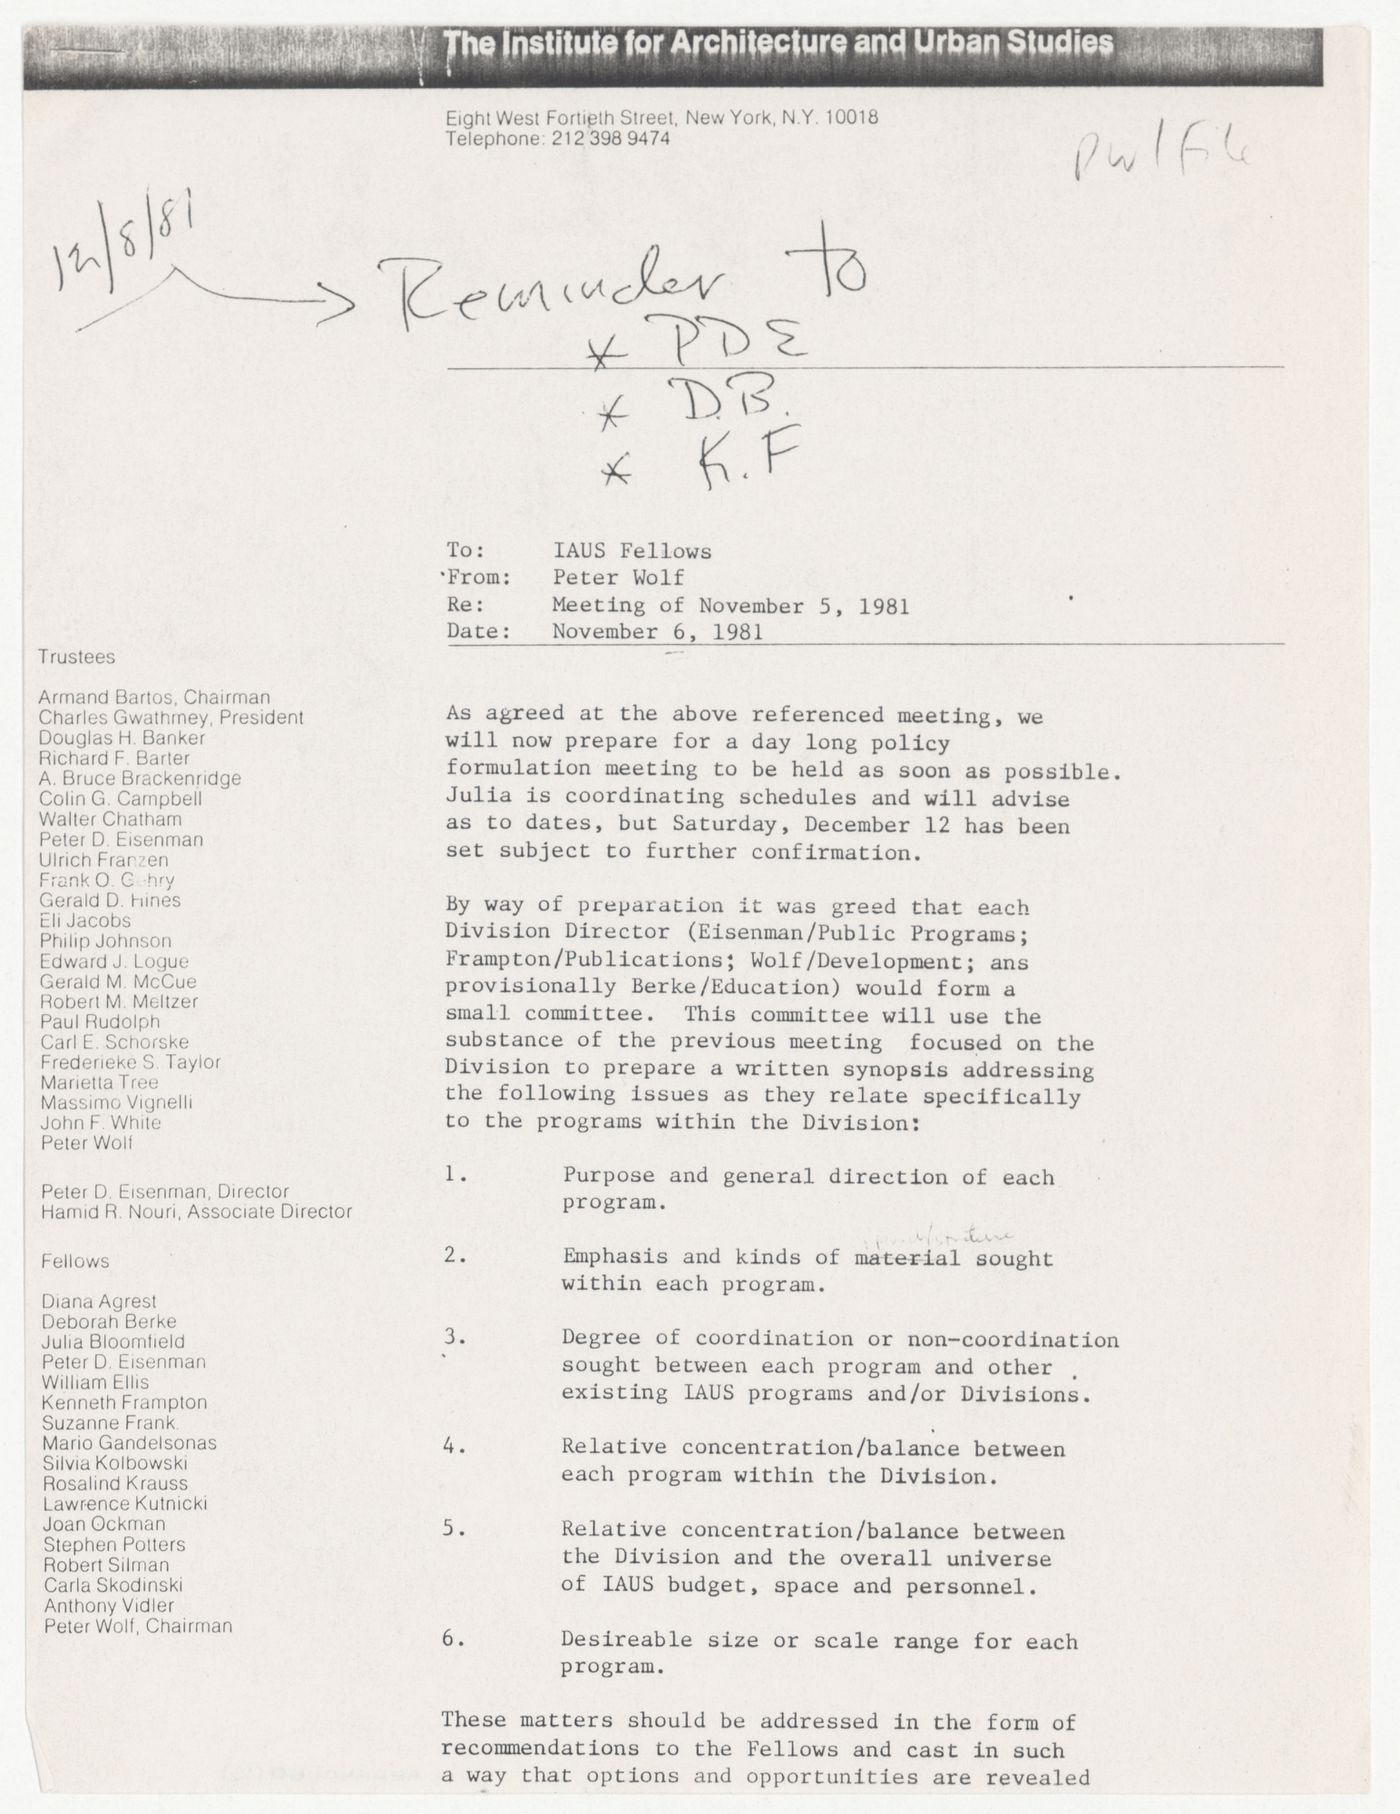 Memorandum from Peter Wolf to the Fellows about policy formulation meeting with annotations